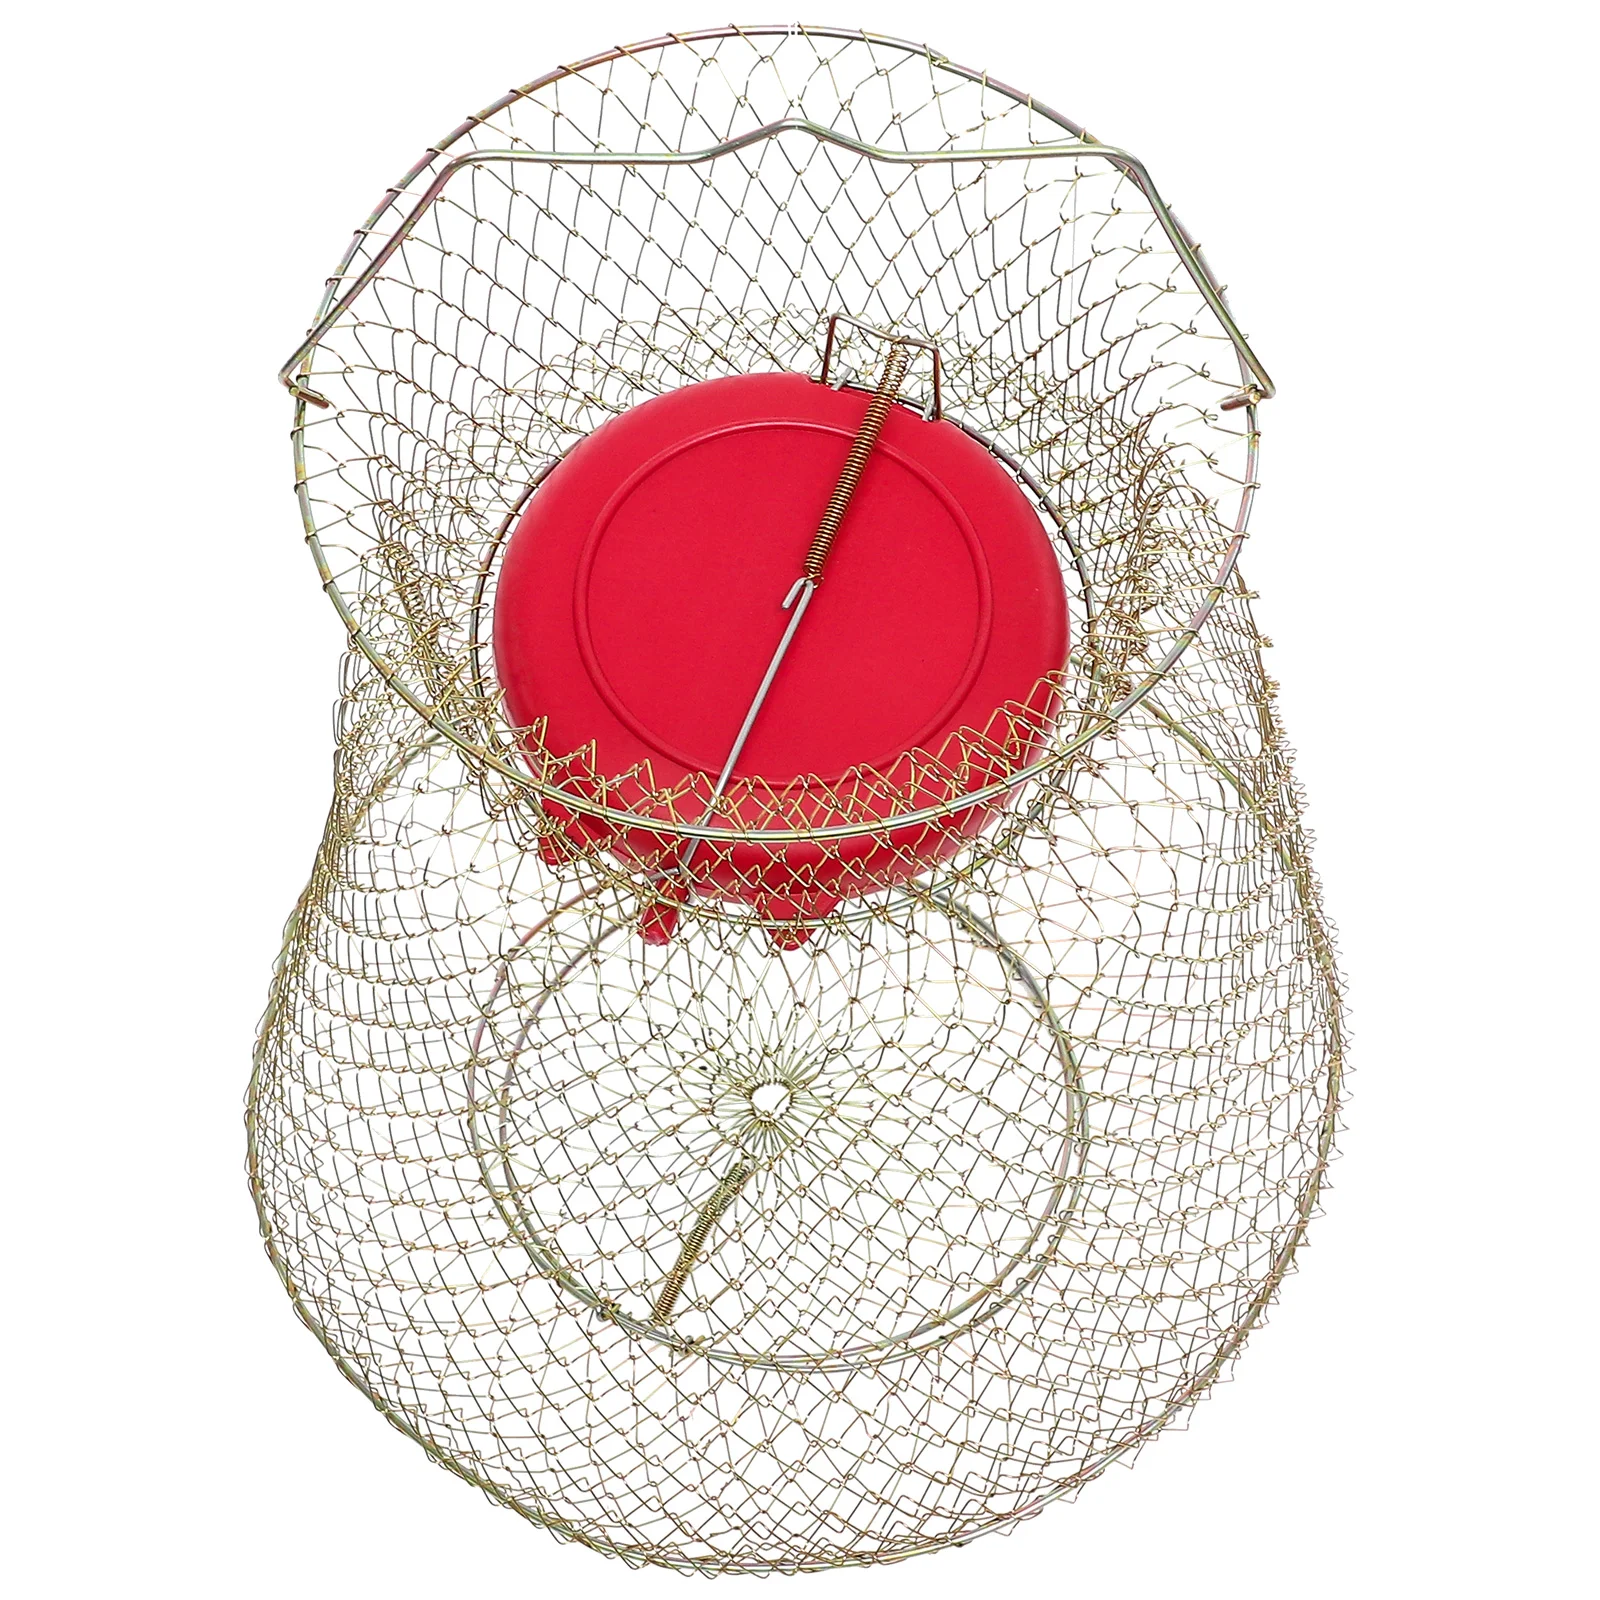 

Iron Fishing Cage Crab Basket Shrimp Fishing Supply Portable Fish Netting Caught Supply Catch Cage Iron Metal Guards for Fishing